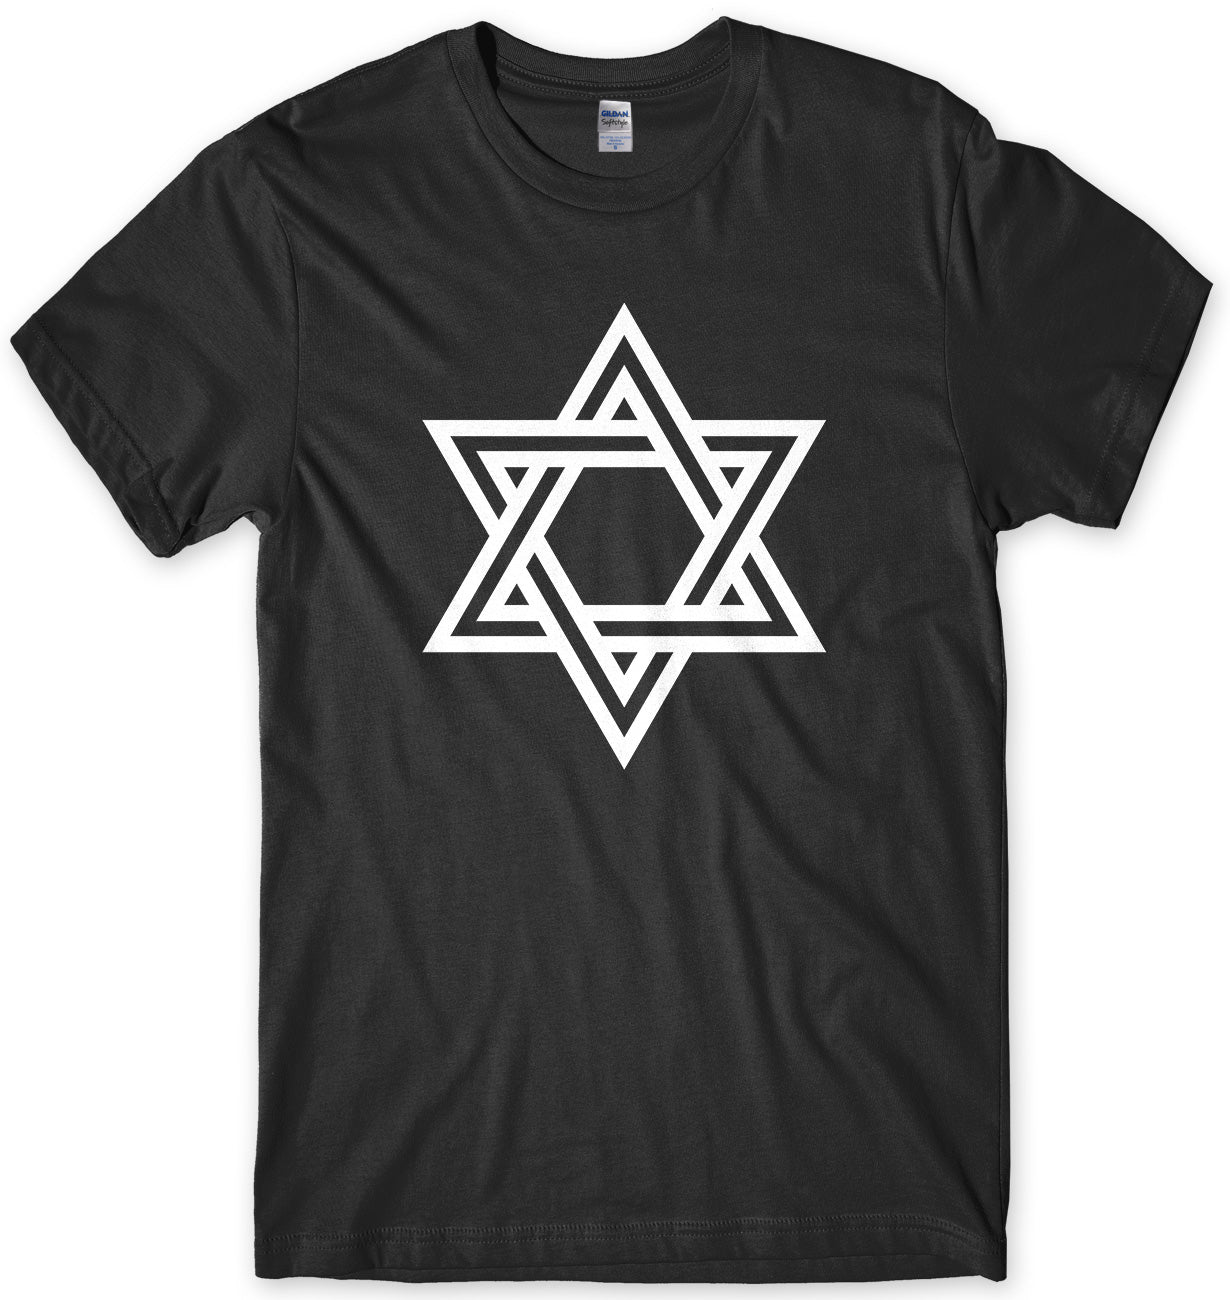 STAR OF DAVID - AS WORN BY SIOUXSIE SIOUX MENS UNISEX T-SHIRT